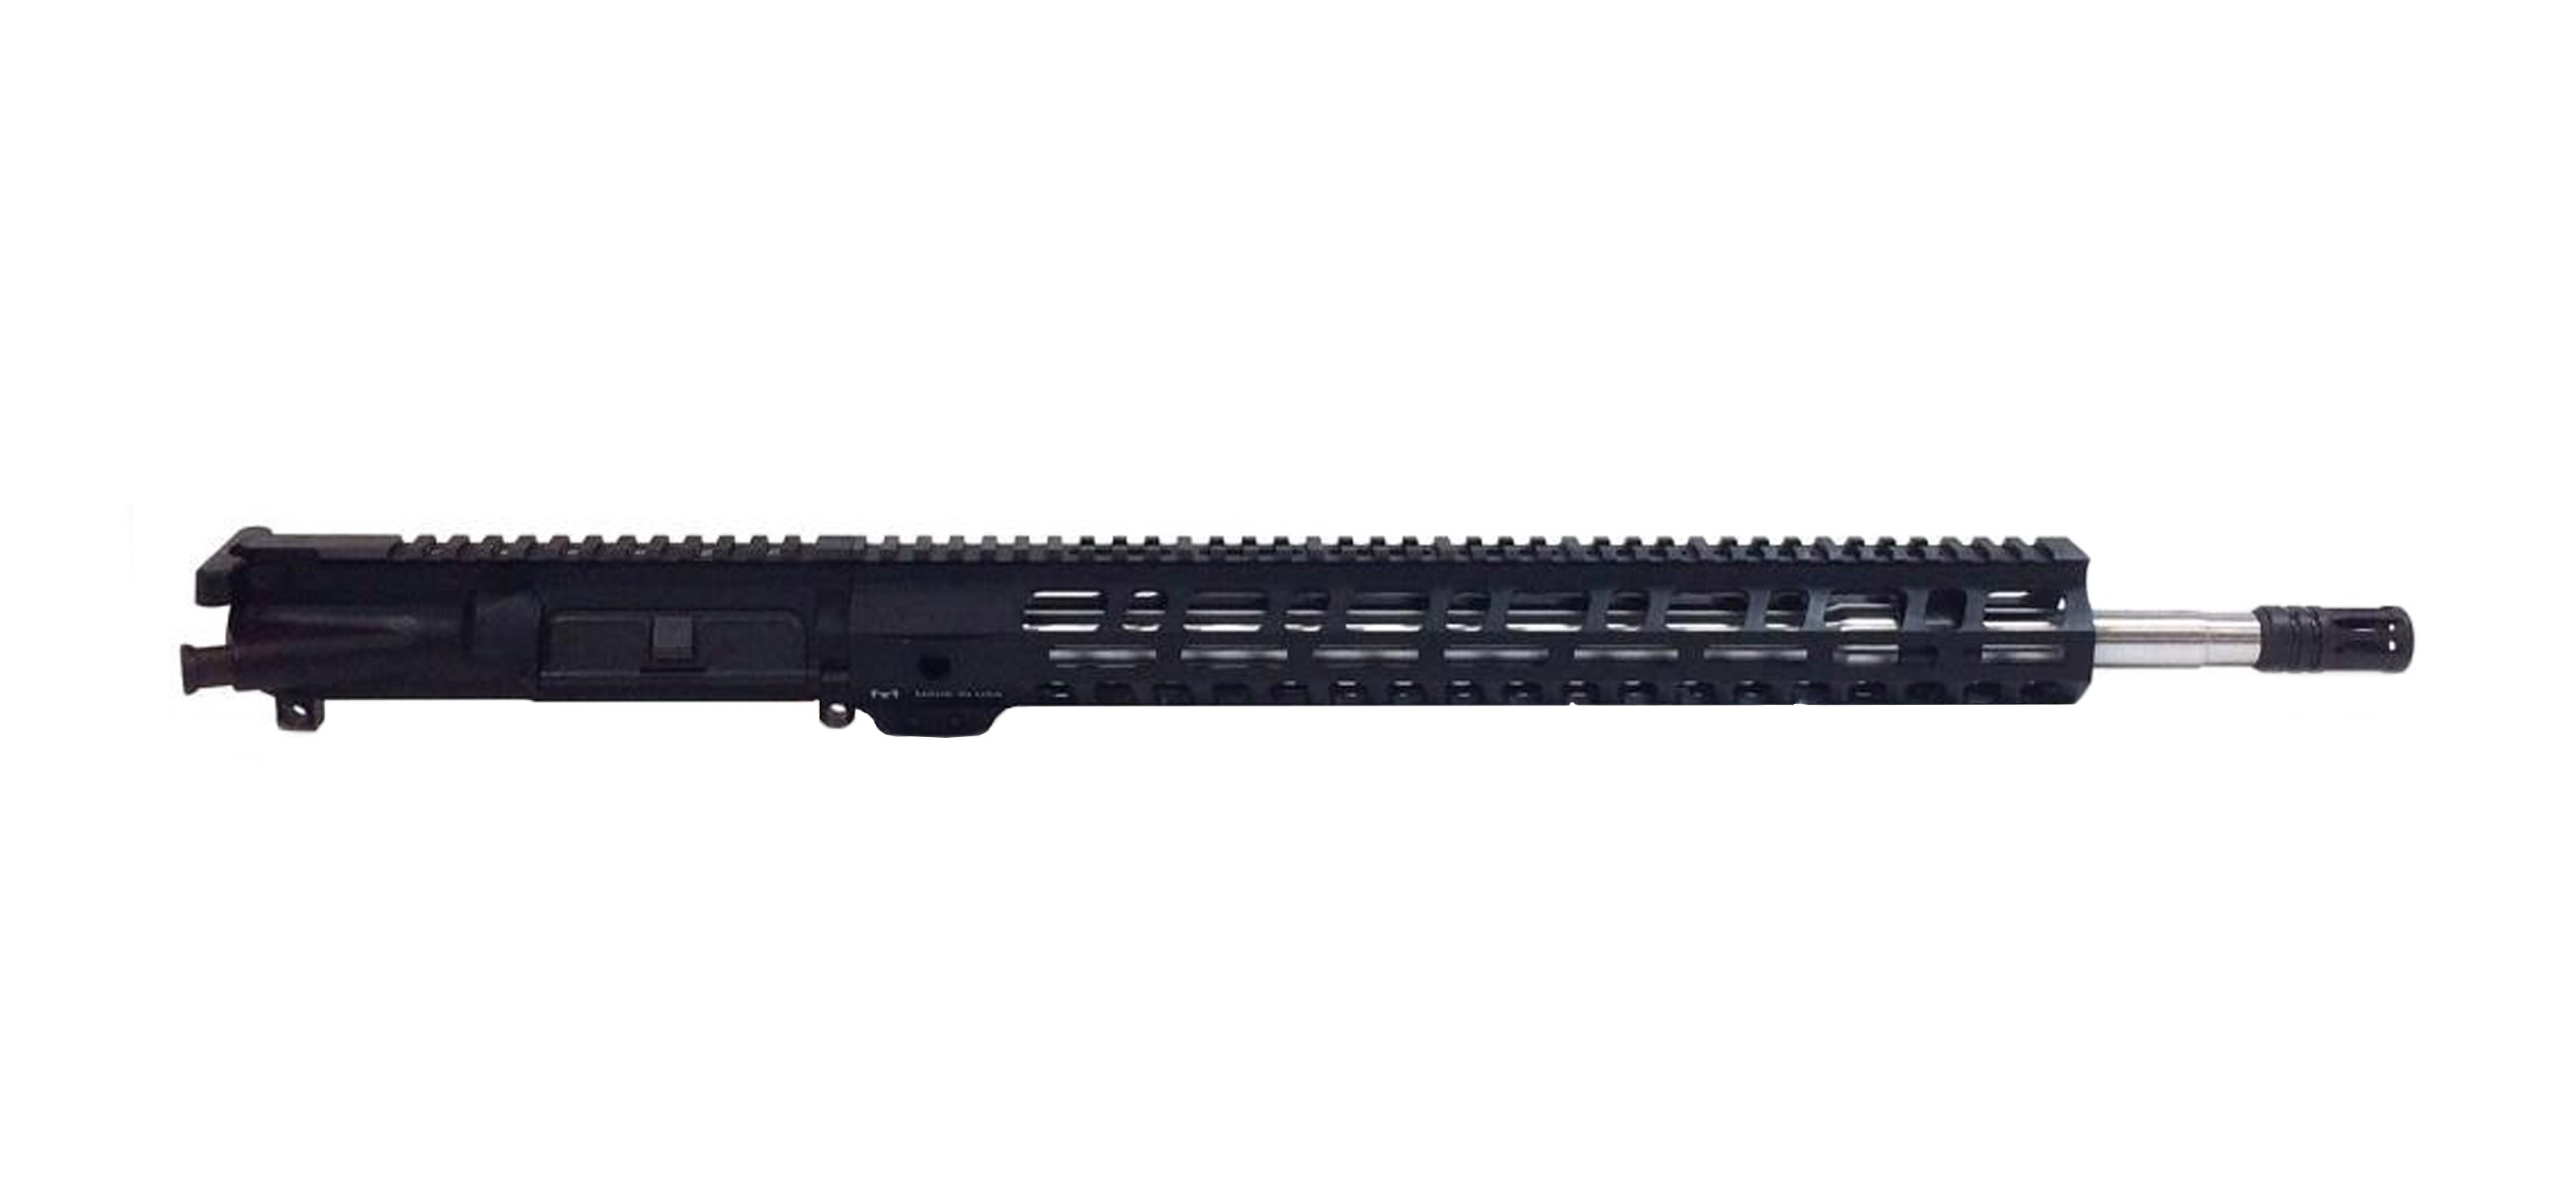 PSA 18" Rifle Length 223 Wylde 1/7 Stainless Steel  15" Lightweight M-lok Upper with BCG & CH - 516445214